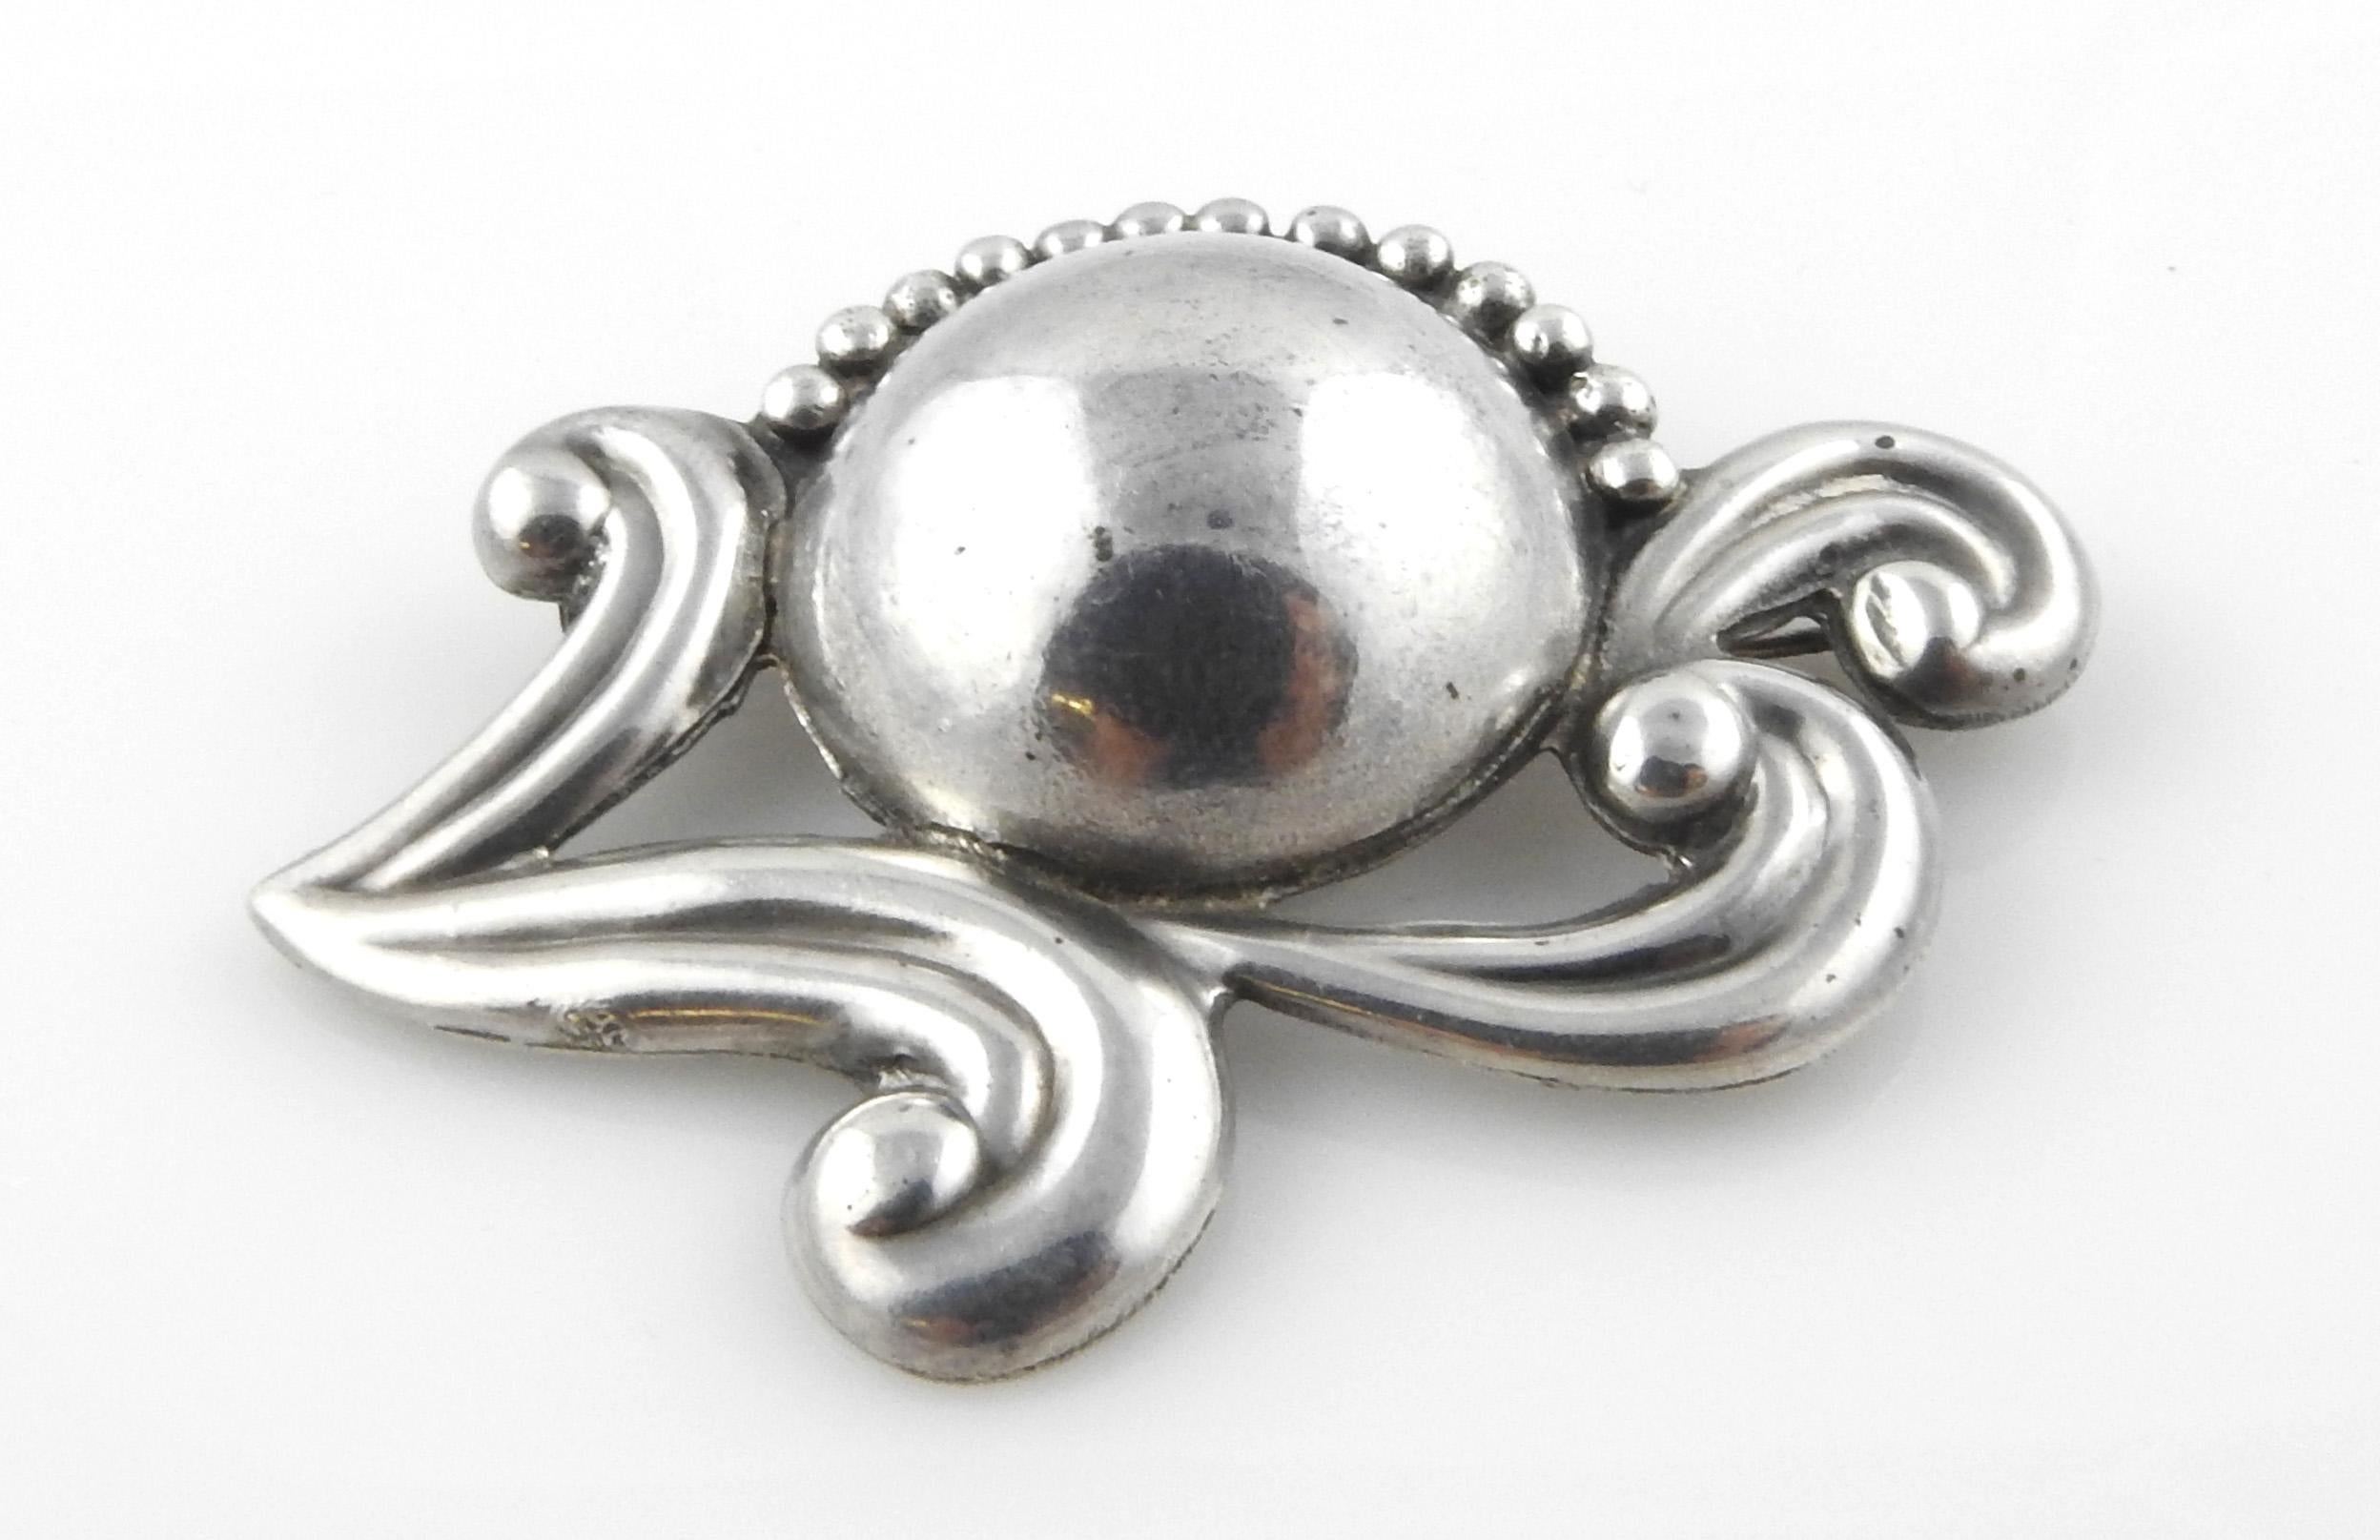 Los Castillo Sterling silver floral design brooch pin #595.

Marked on back in two places: LOS CASTILLO, TAXCO STERLING, MADE IN MEXICO 595.

LOS CASTILLO, TAXCO STERLING, MADE IN MEXICO.

Measures : 2 3/8